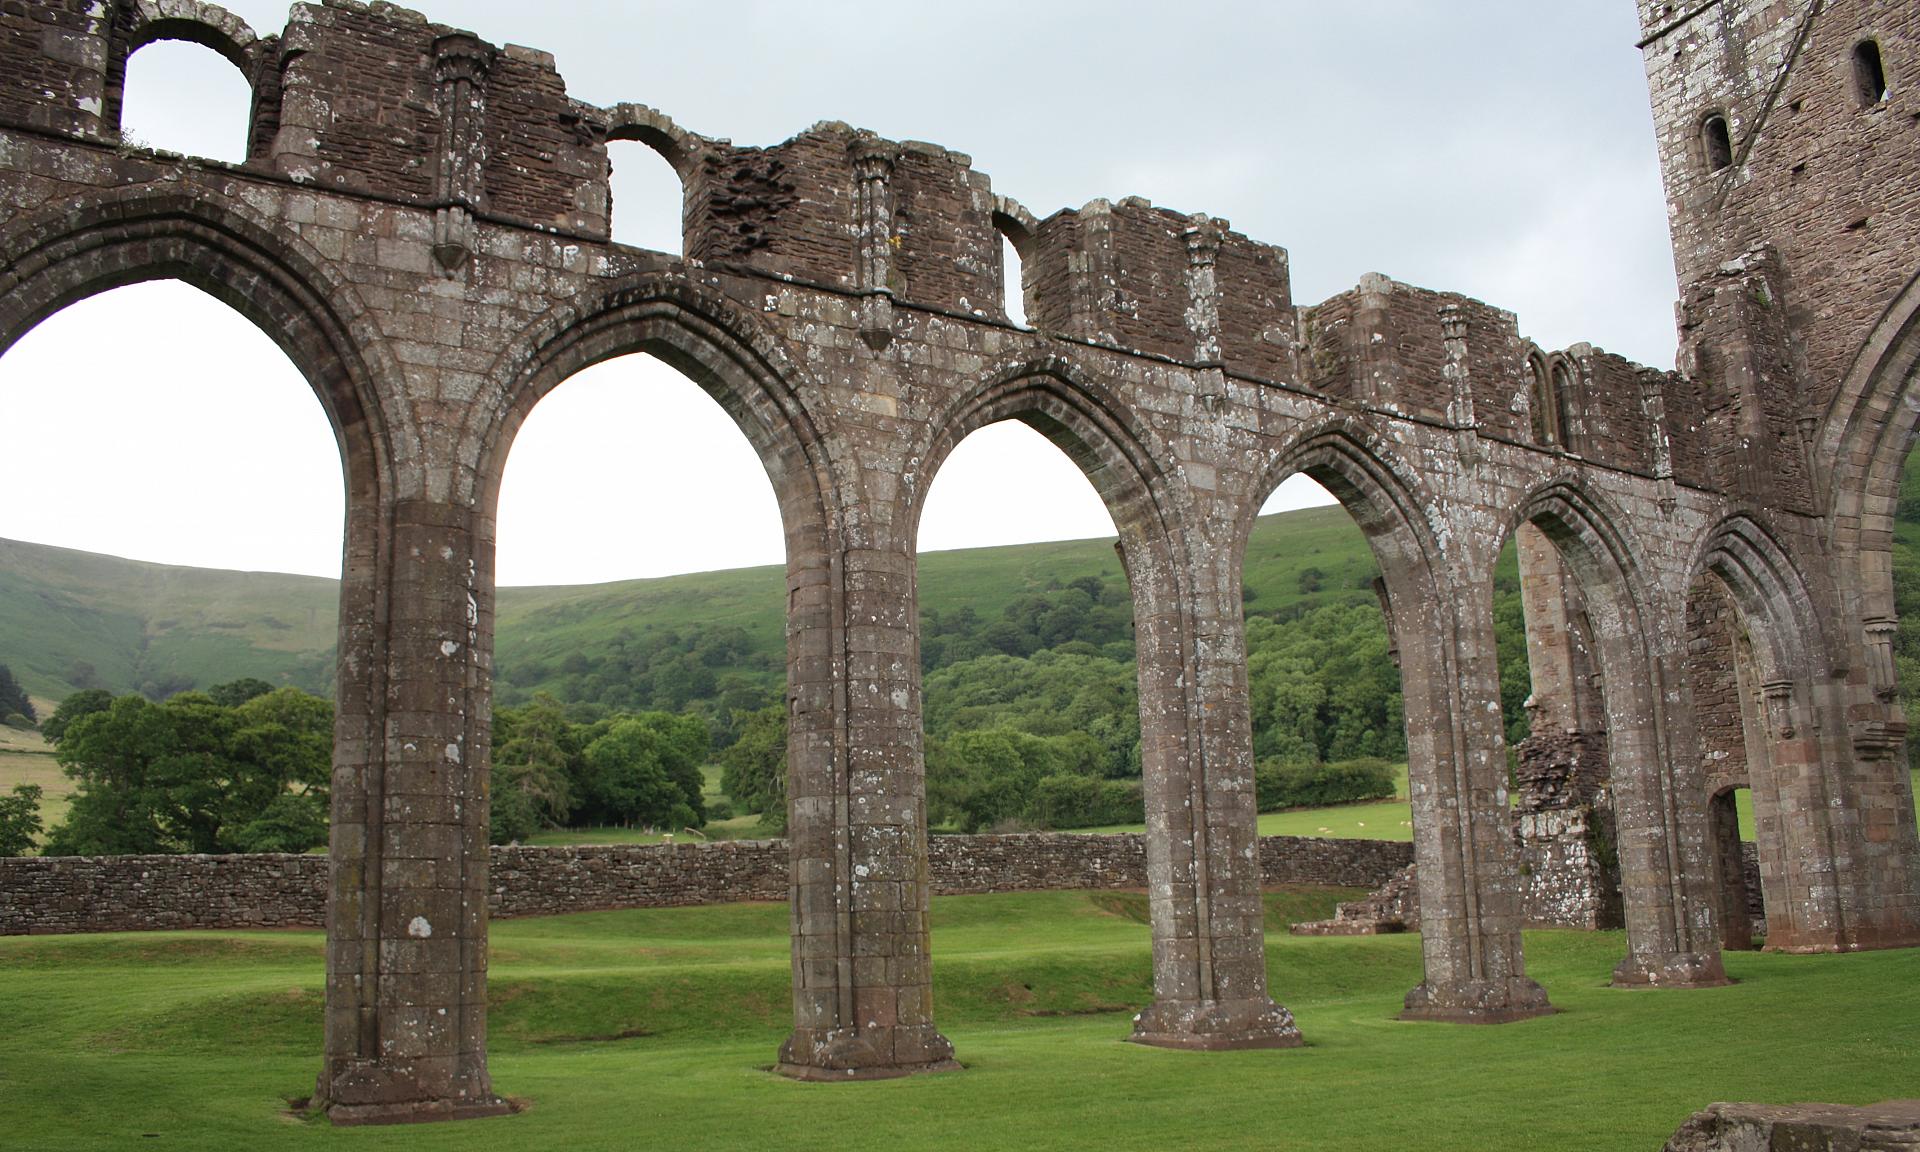 The romantic ruins of the priory